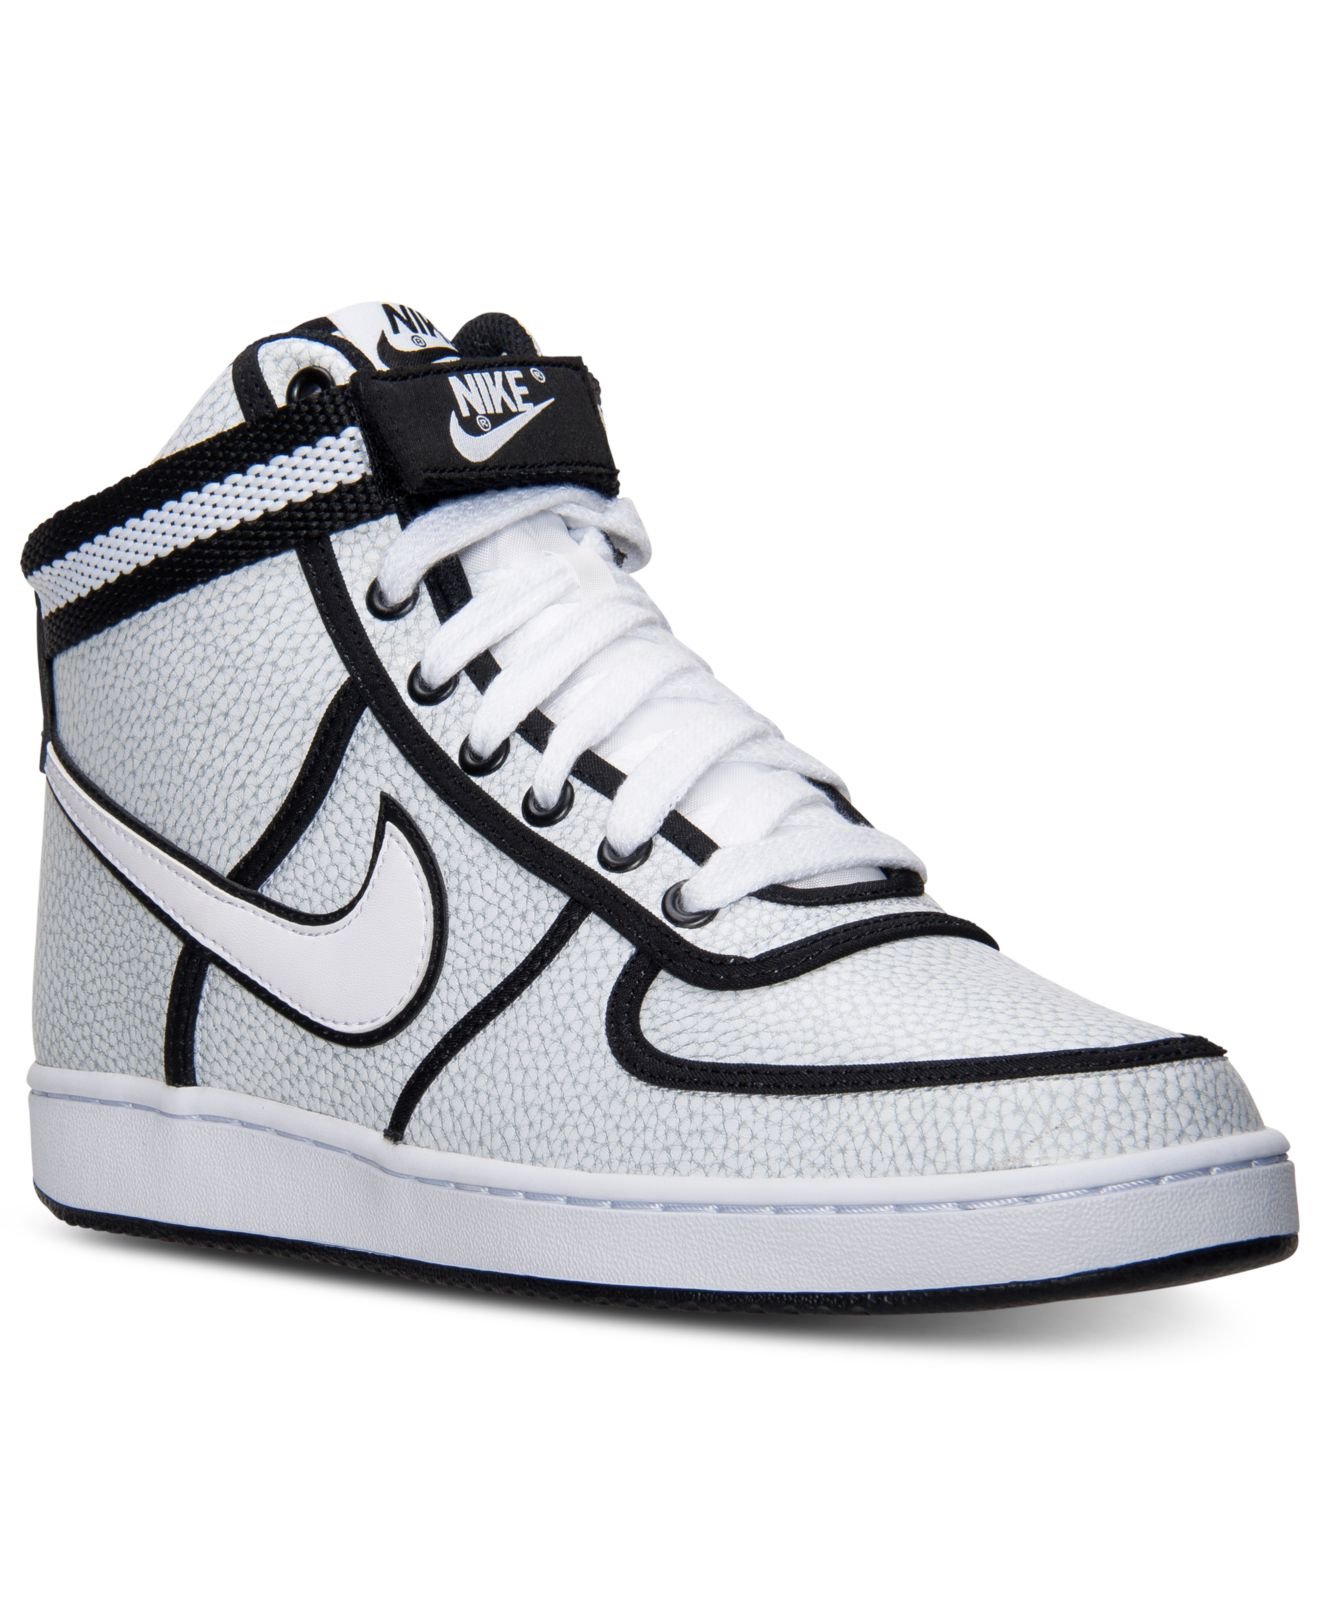 Nike Men'S Vandal High Casual Sneakers From Finish Line in White/White